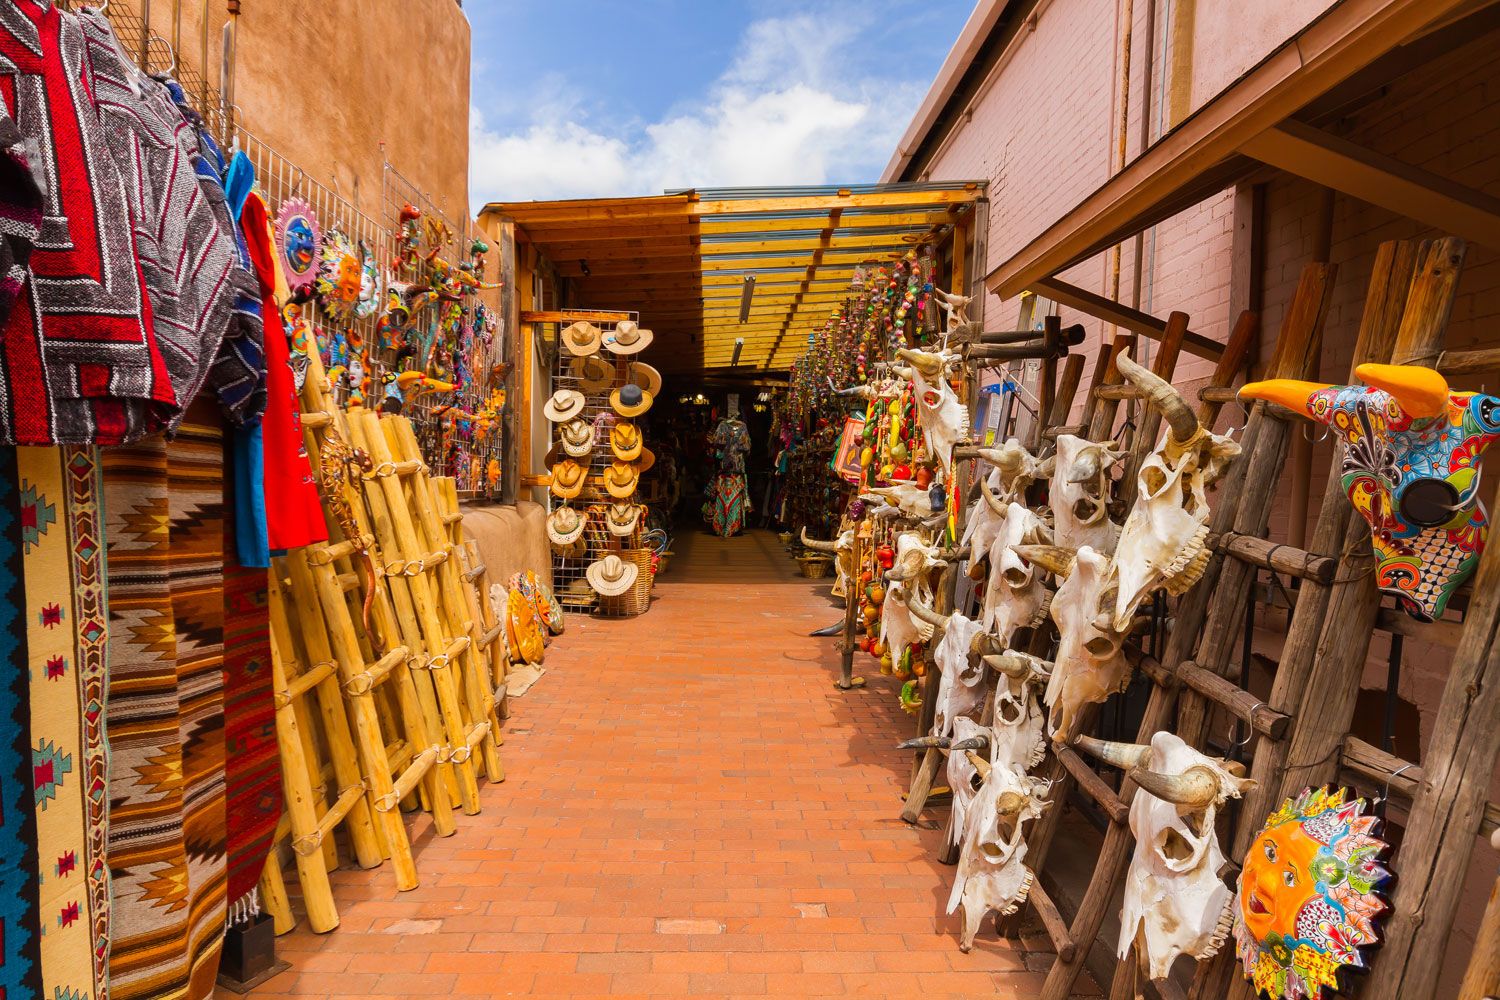 Santa Fe, New Mexico: The City of Turquoise is A Burgeoning Haven For